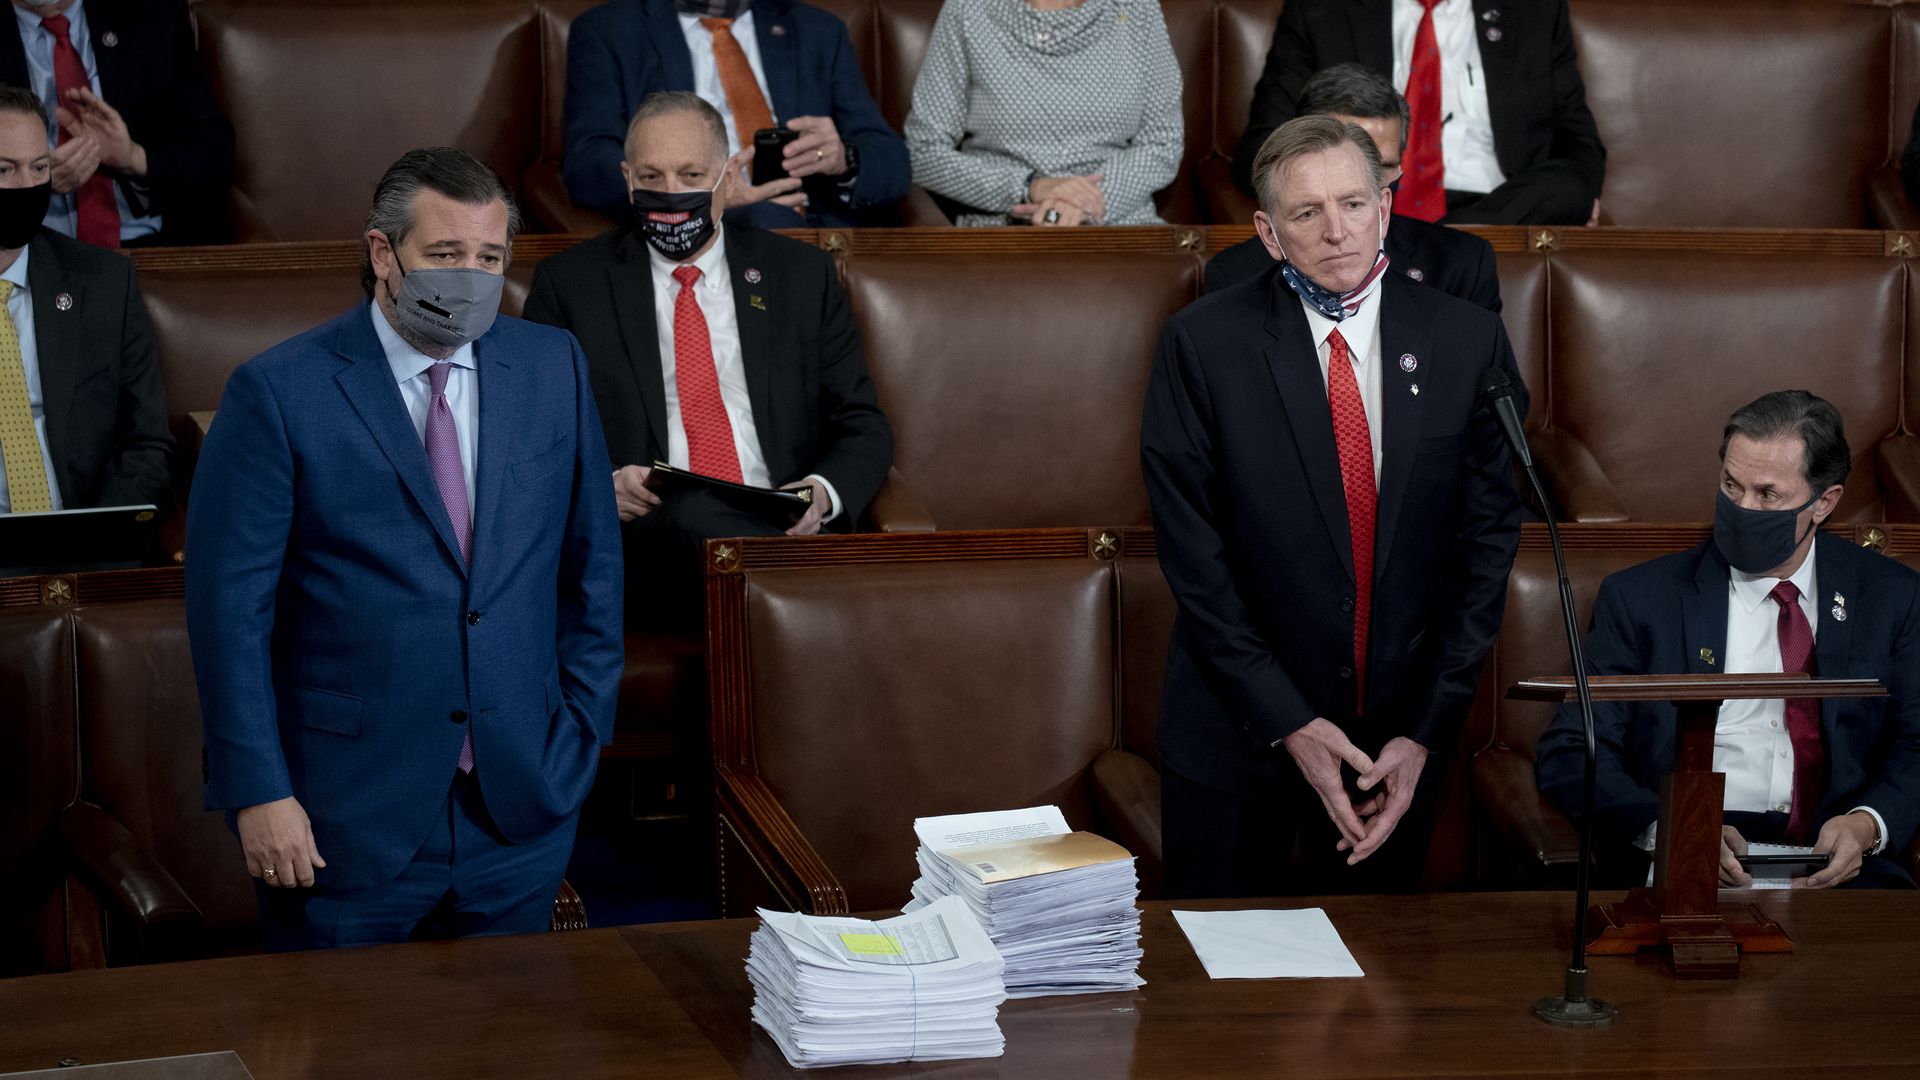 Sen. Ted Cruz and Rep. Paul Gosar are seen objecting to the certification of Arizona' Electoral College votes on Jan. 6, 2021.